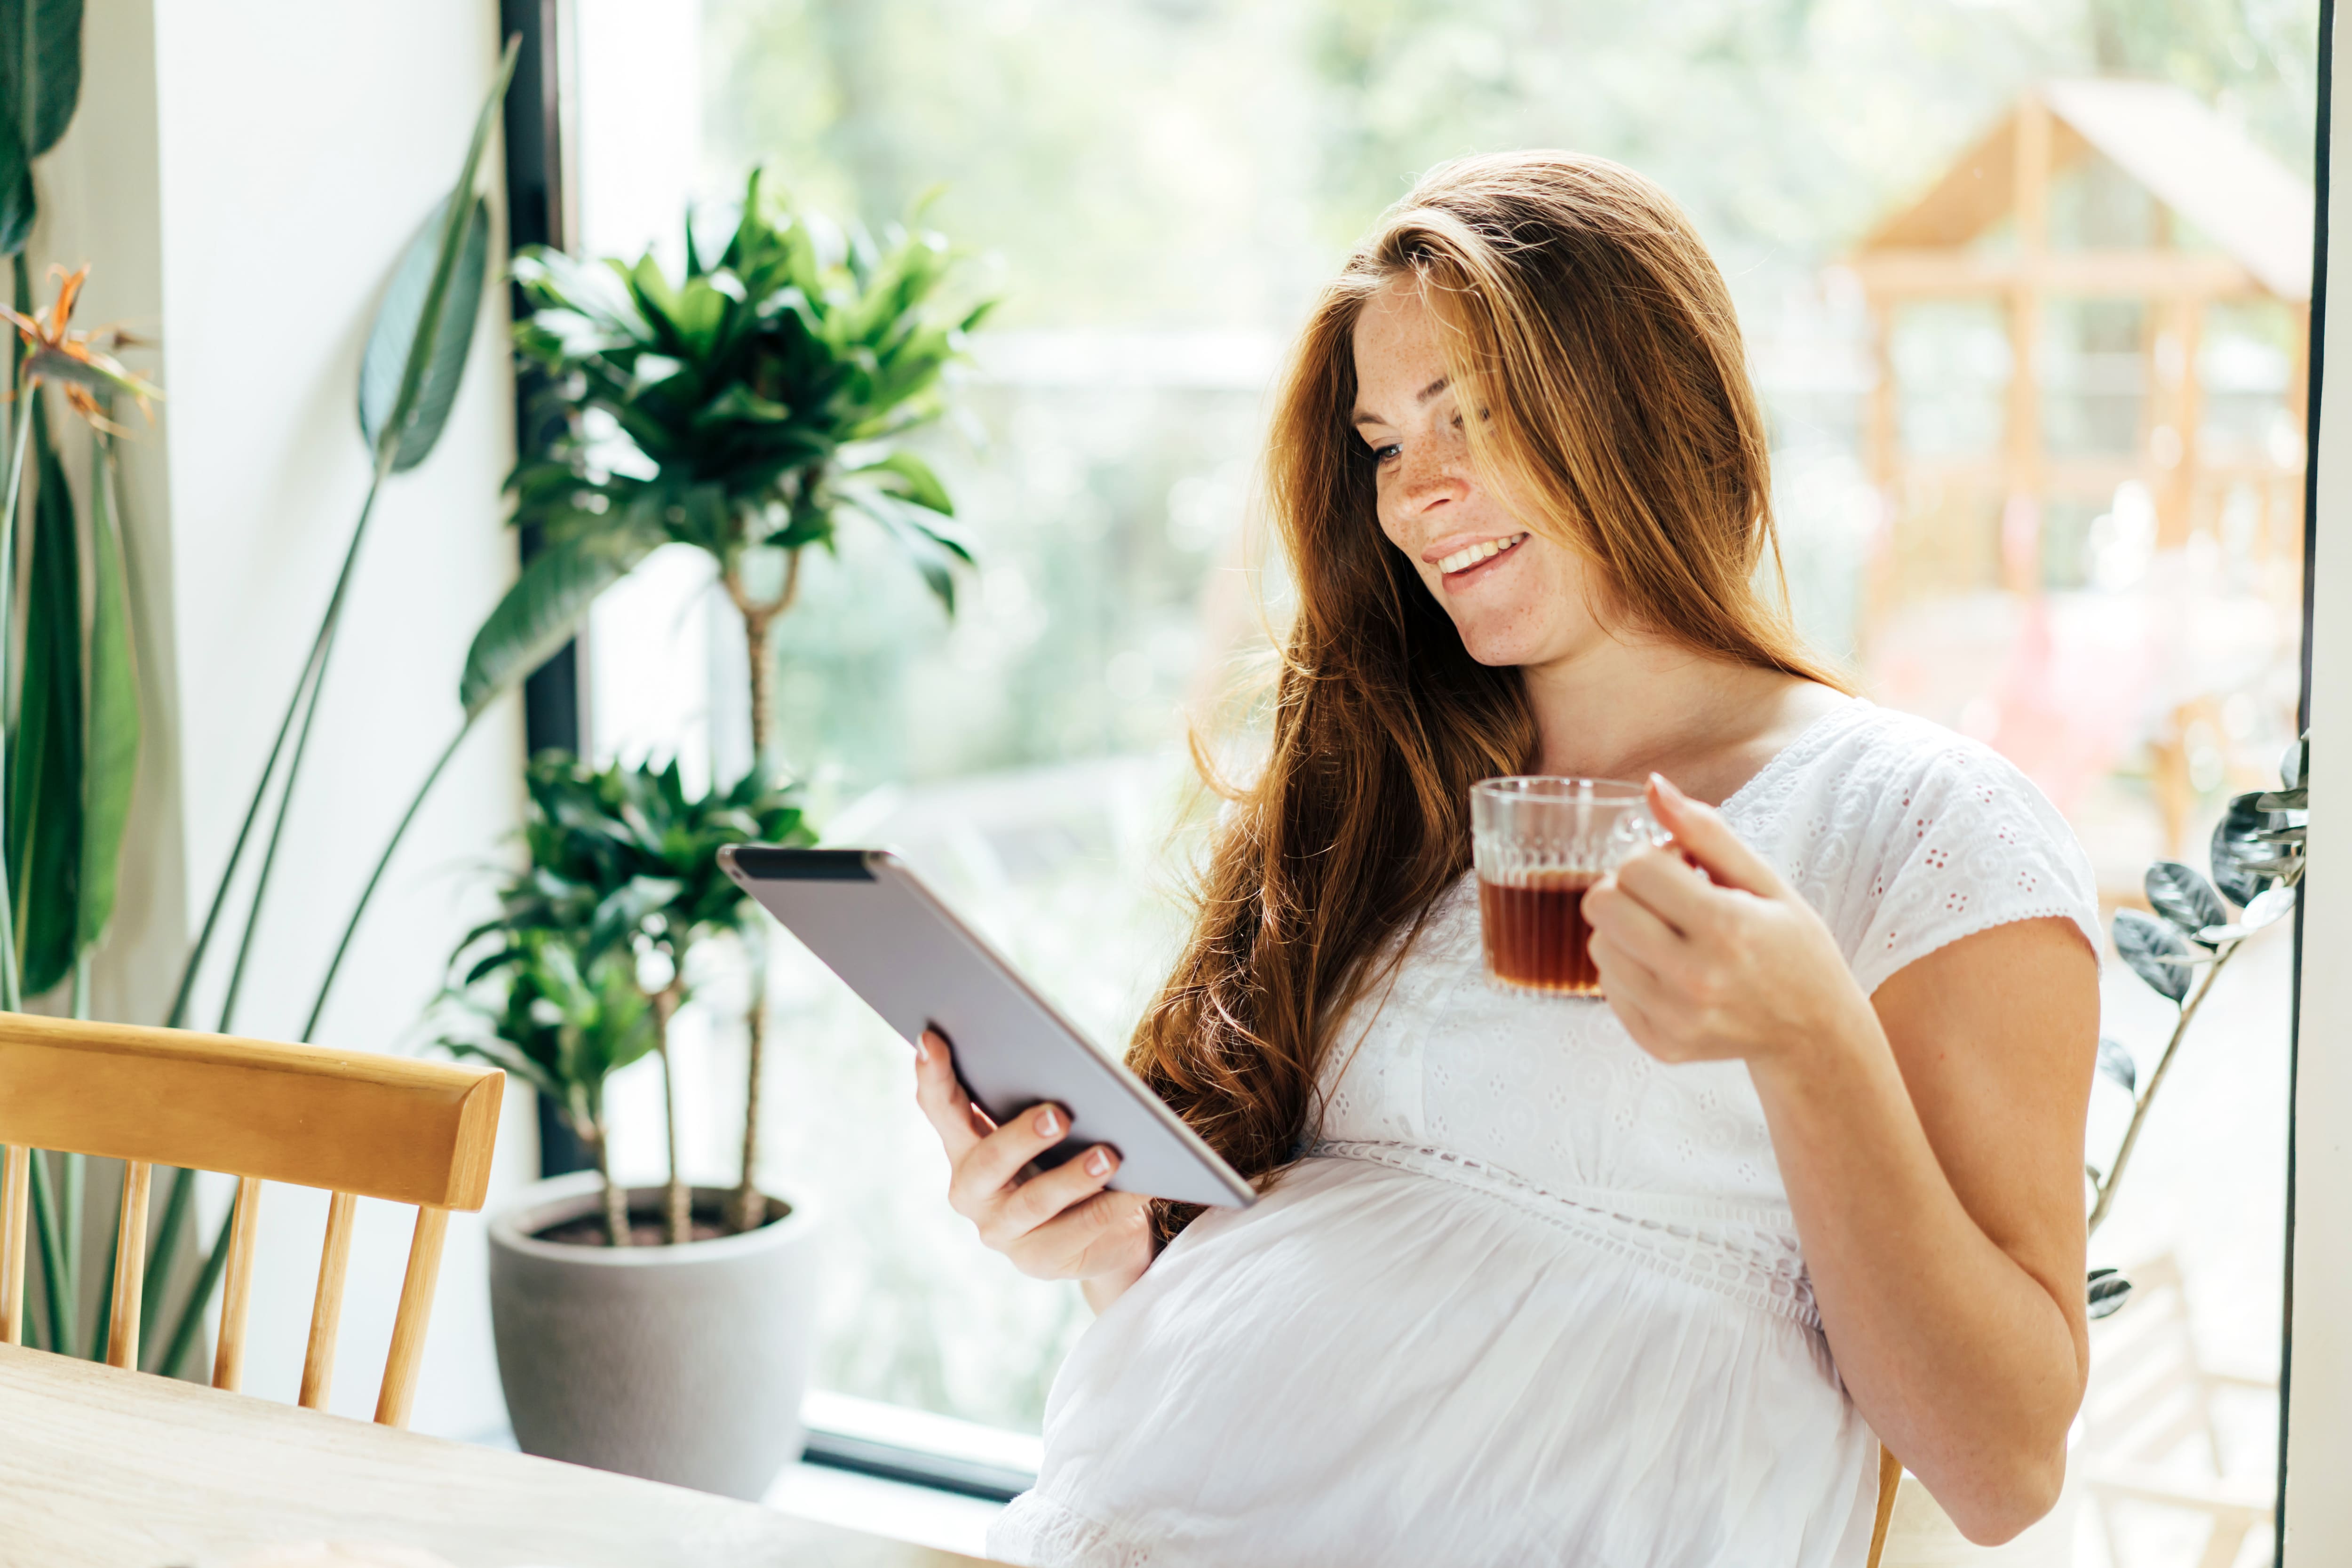 Pregnant woman drinks tea and looks at the screen of a computer tablet.